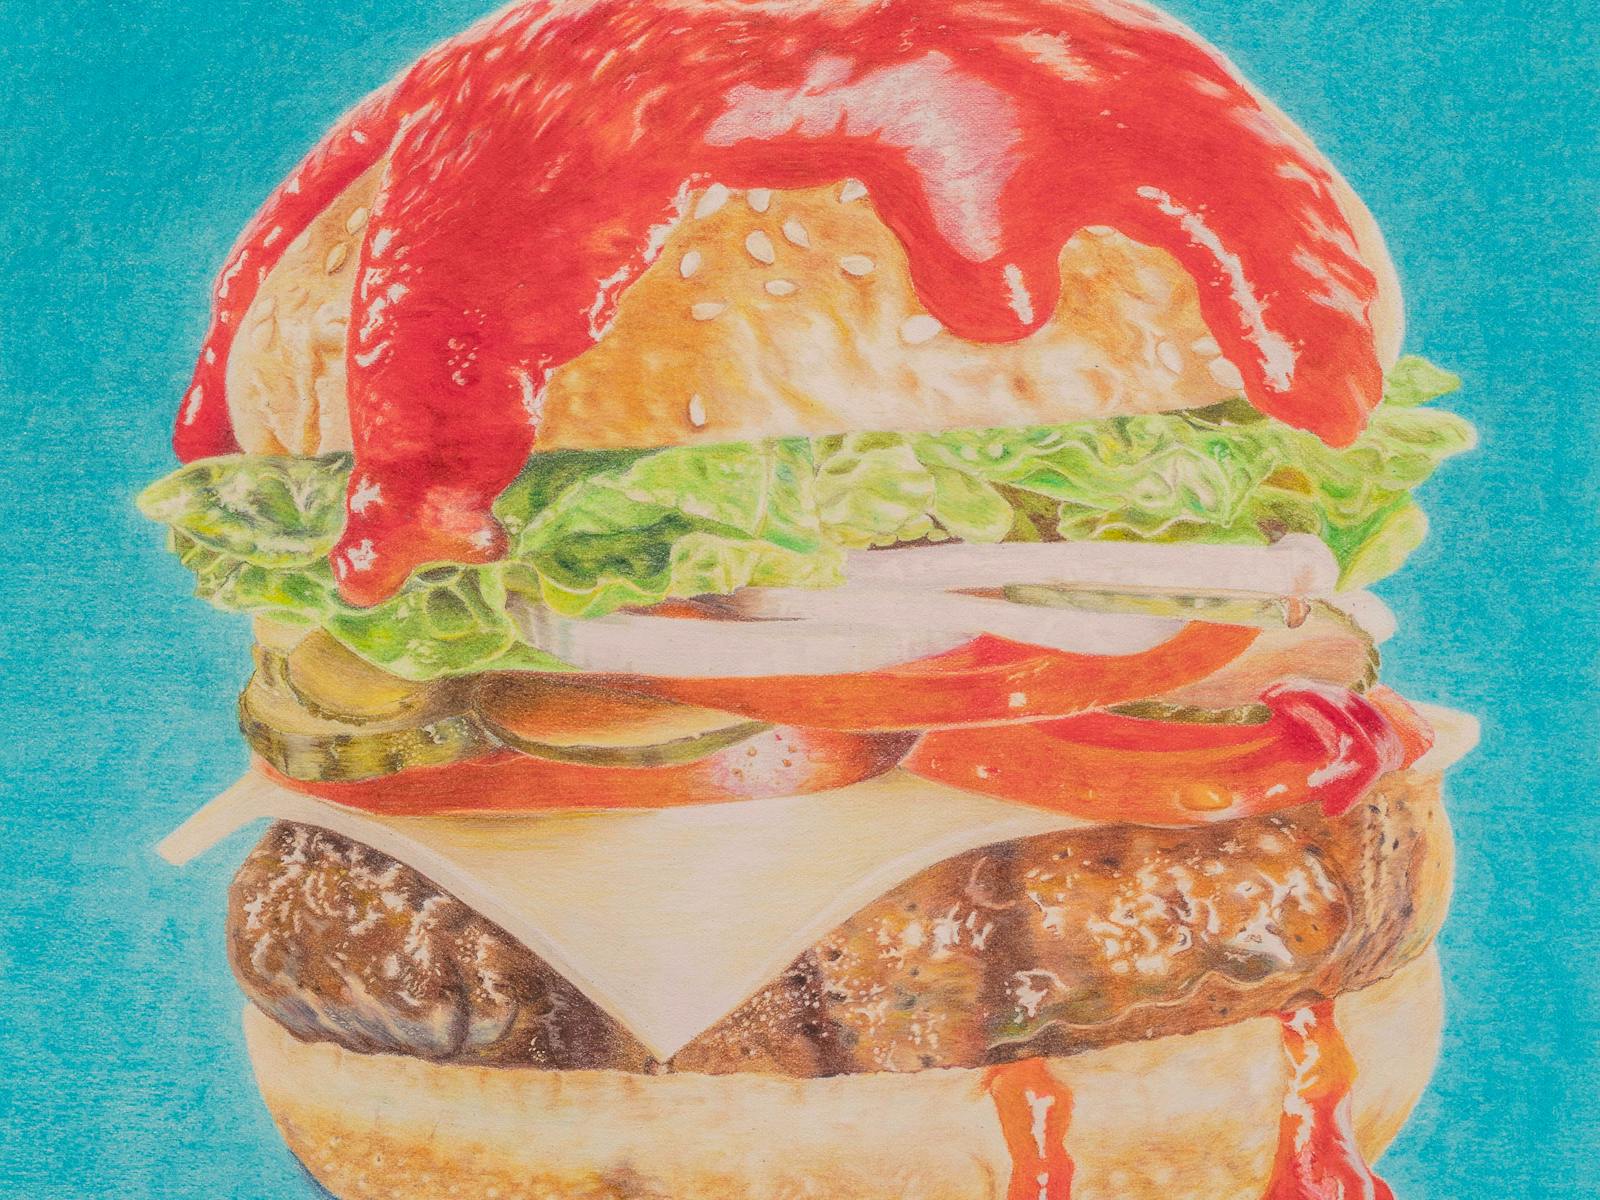 A very bright colour pencil drawing  of a juicy hamburger with tomato sauce drizzles over the bun.